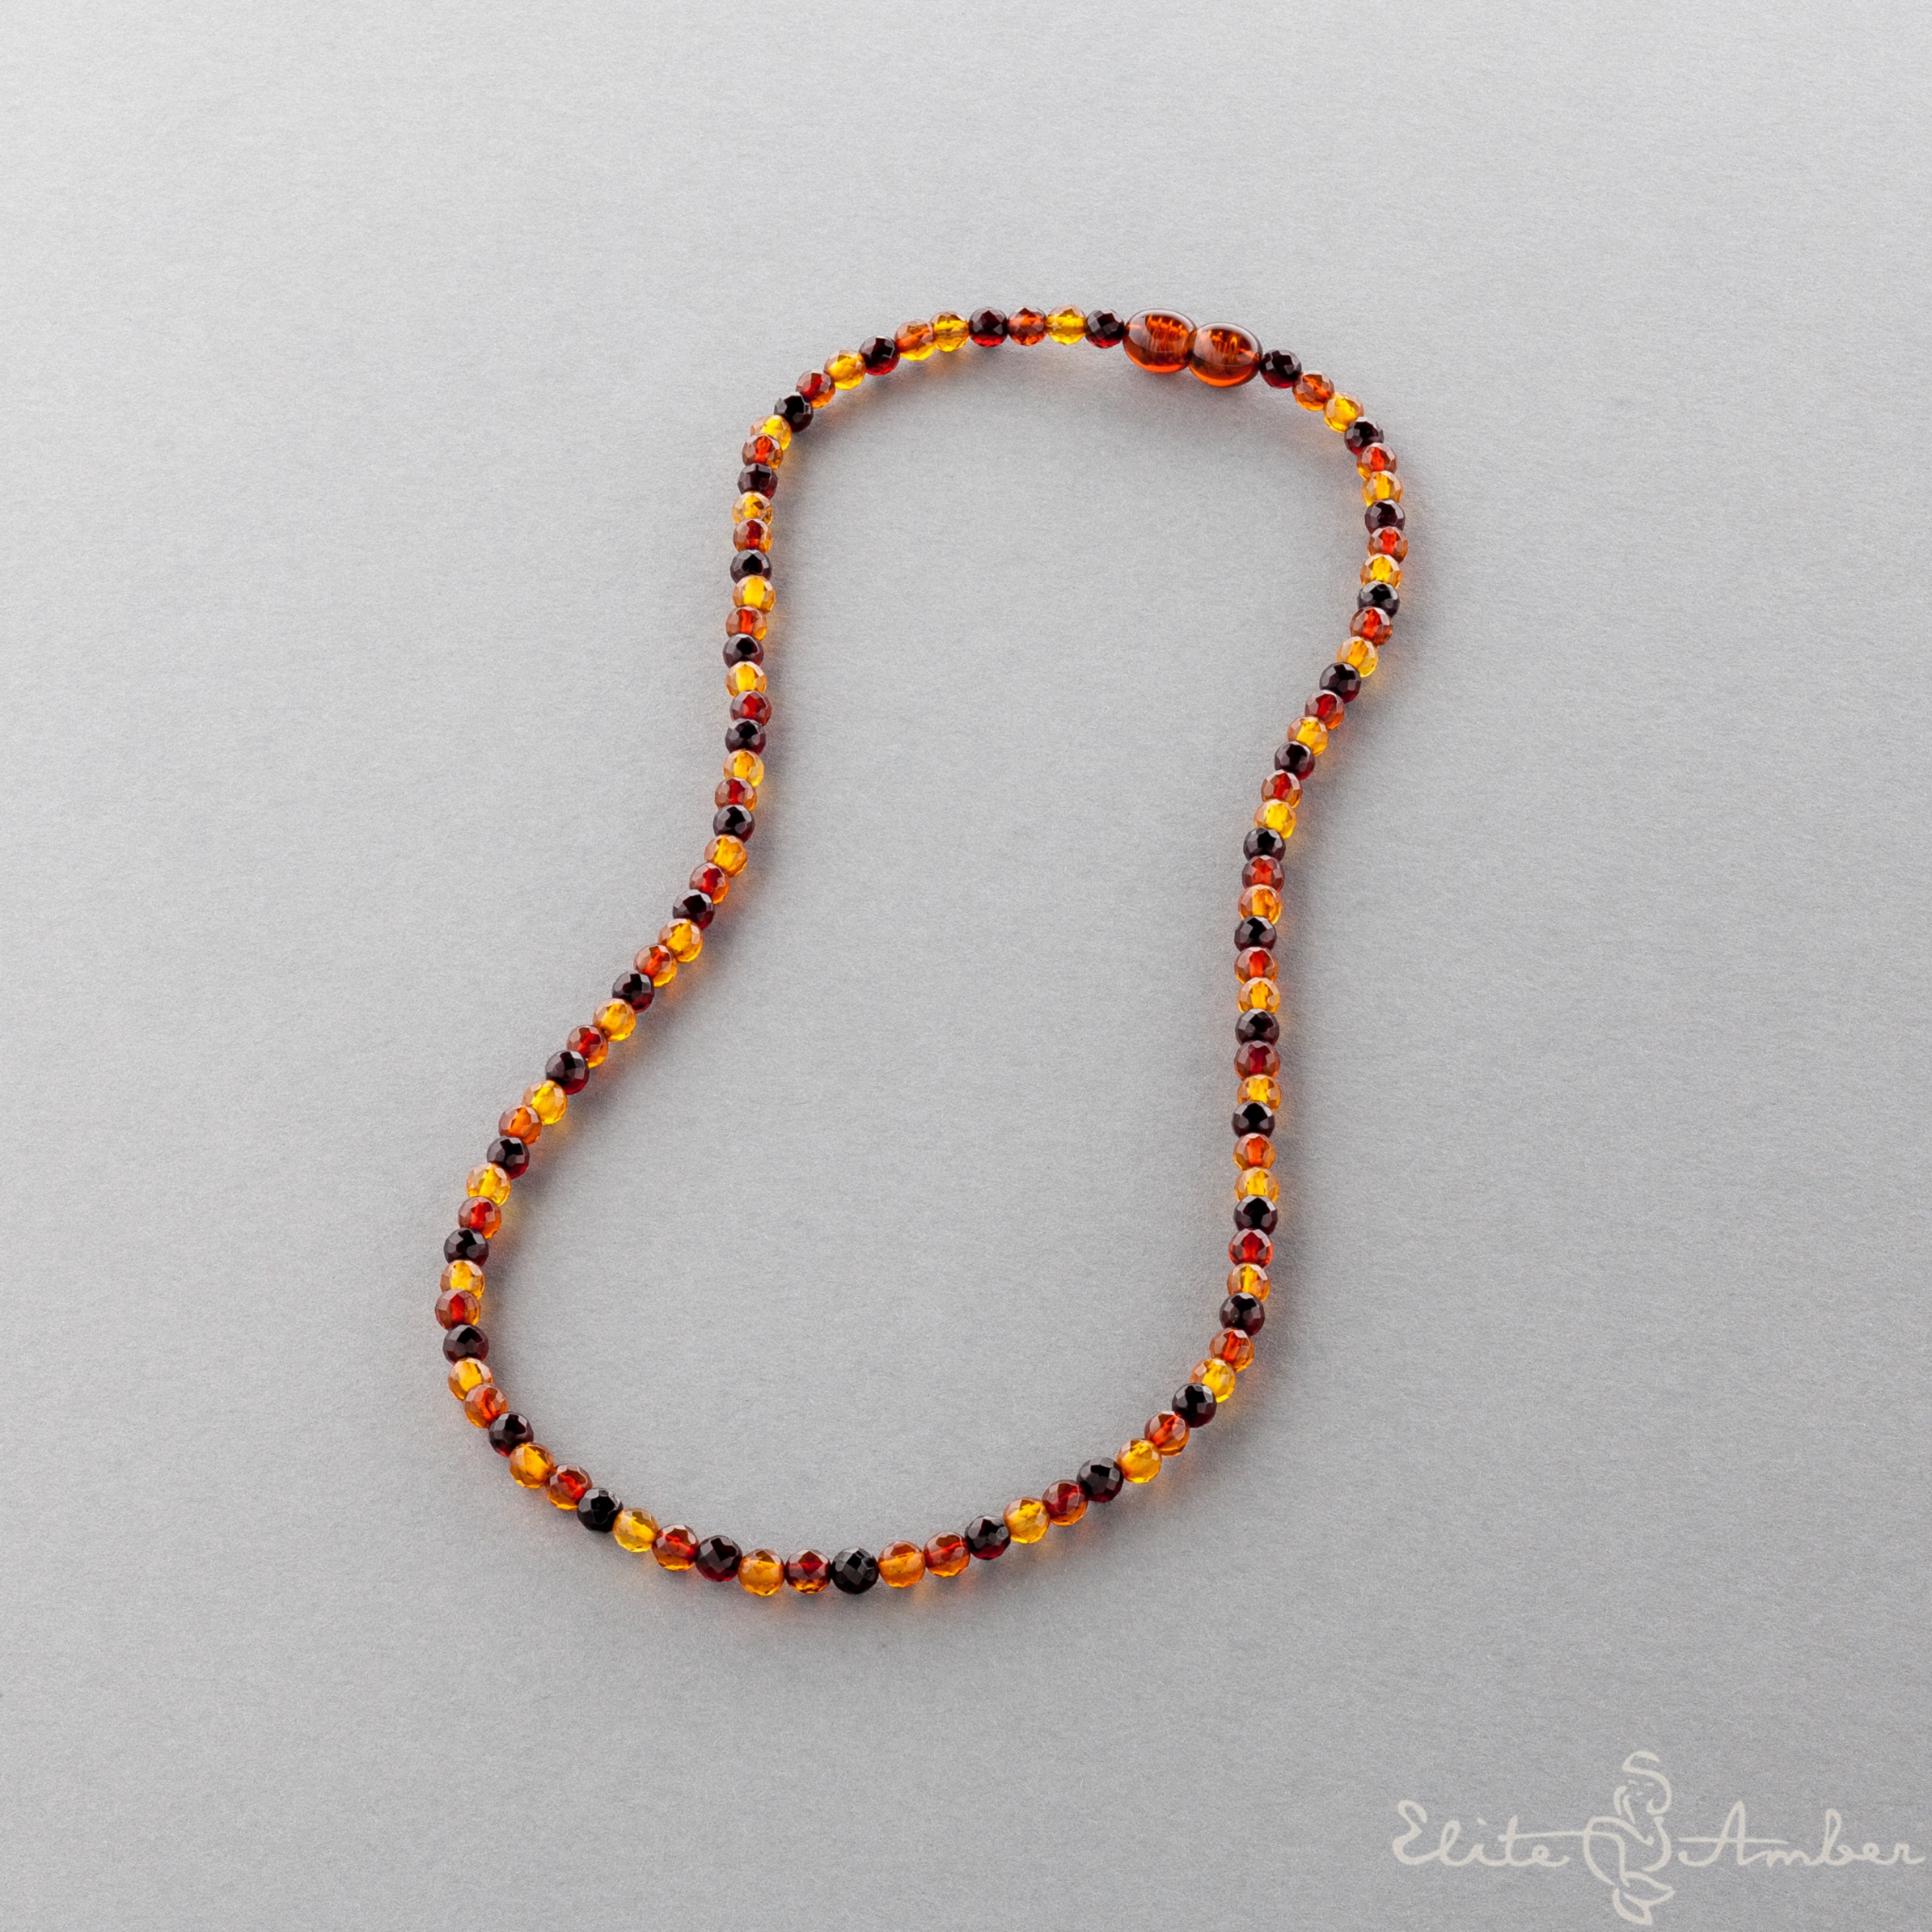 Amber necklace "Small glossy colors"